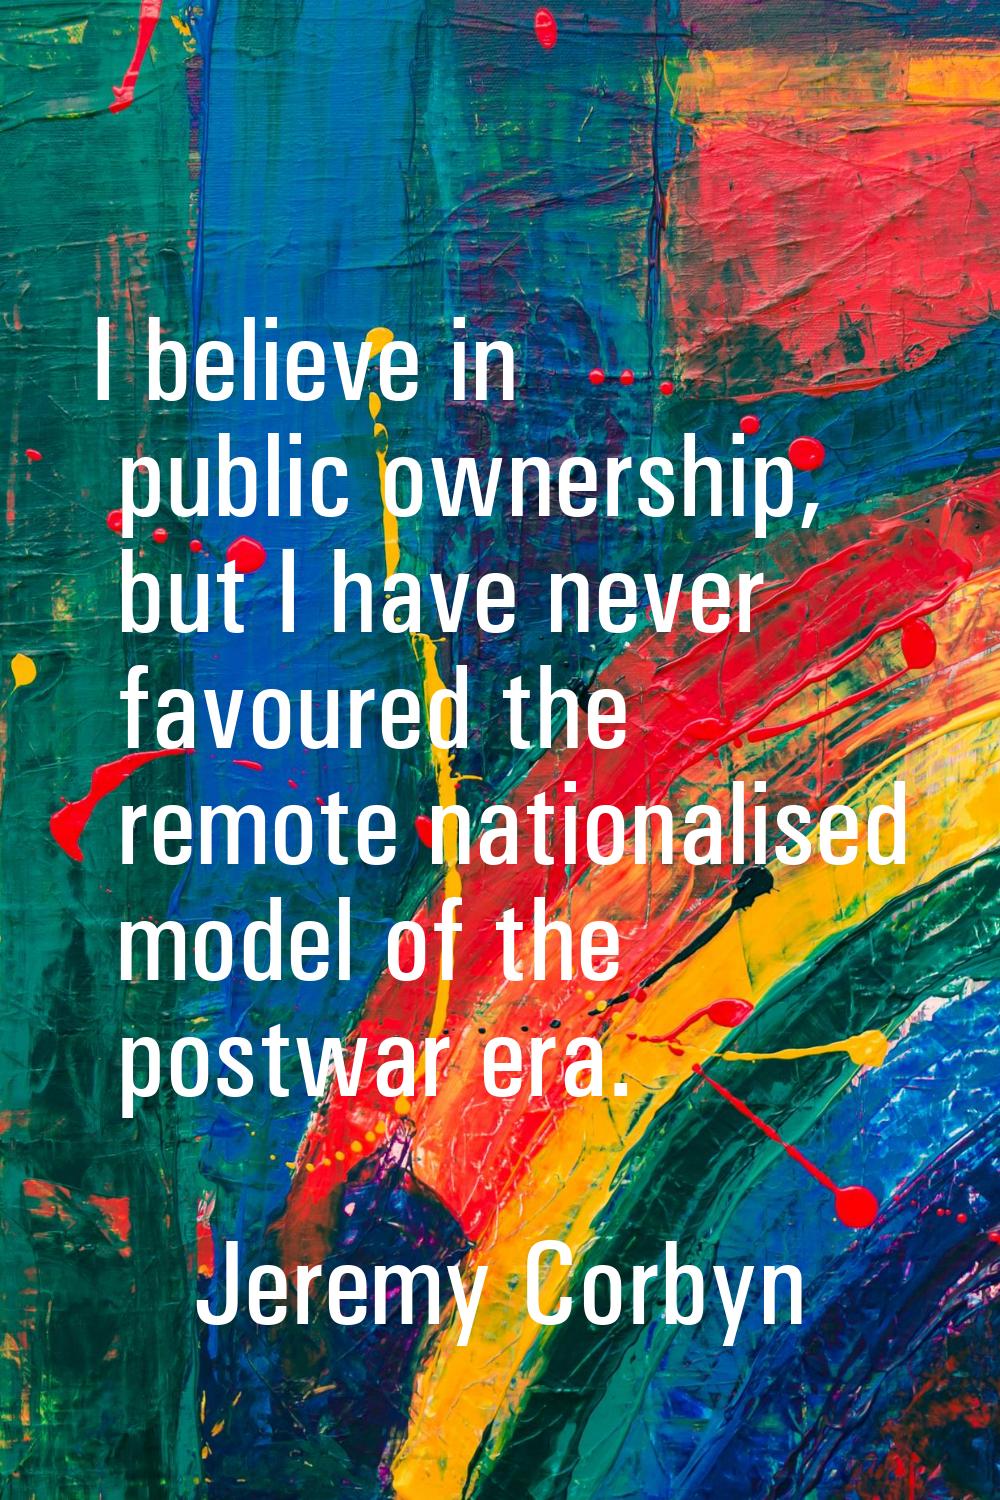 I believe in public ownership, but I have never favoured the remote nationalised model of the postw